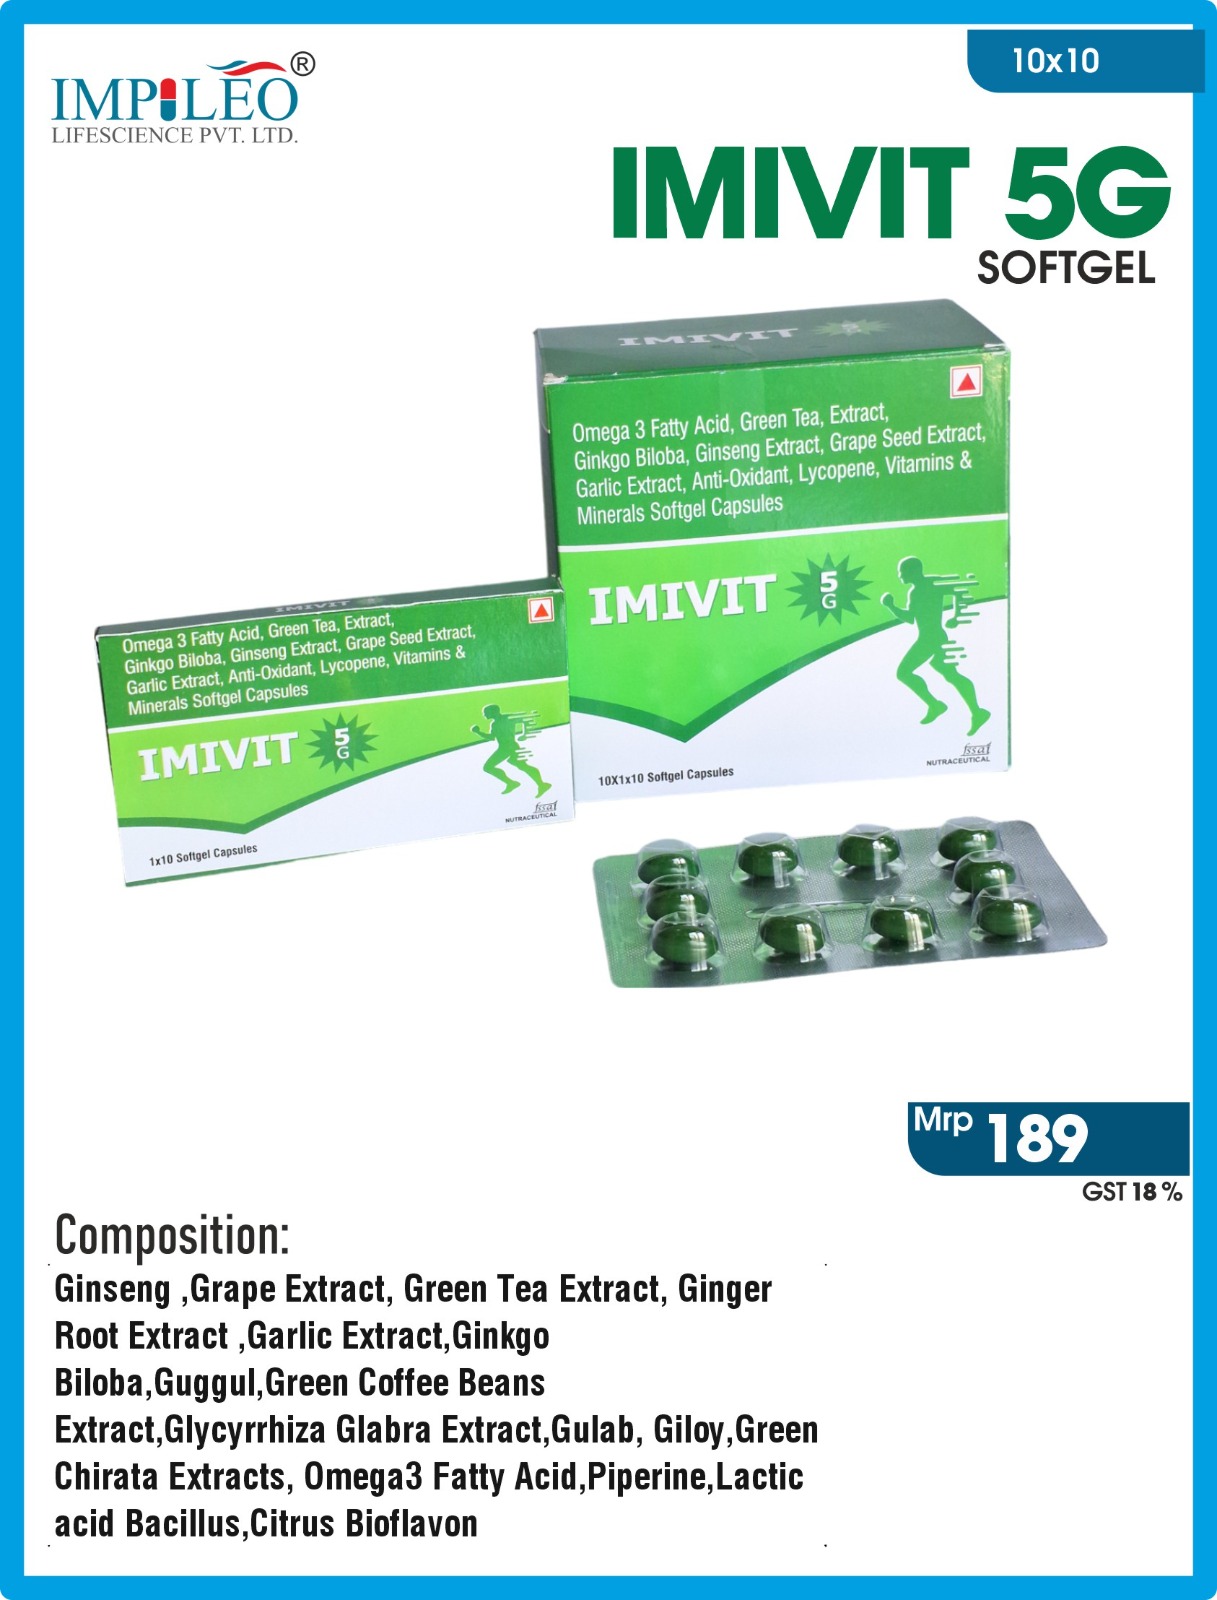 Superior IMIVIT 5G Softgel Capsule Now Available from Leading PCD Pharma Franchise in Chandigarh